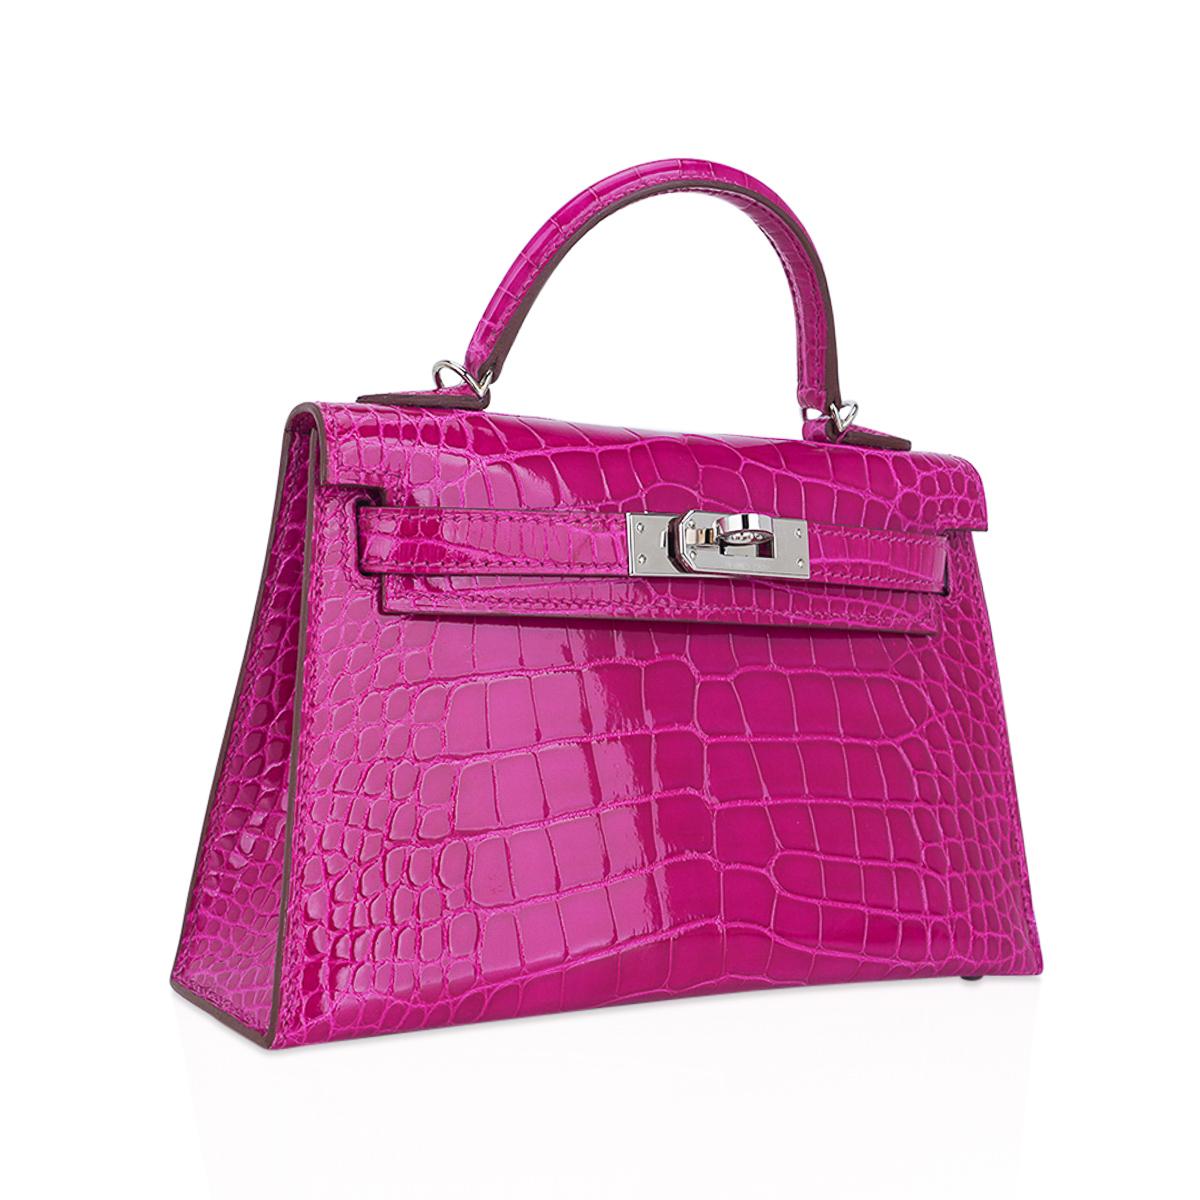 Mightychic offers a Limited Edition Hermes Kelly 20 Sellier bag featured in stunning Rose Scheherazade alligator.
Accentuated with crisp with palladium hardware.
Timeless and highly coveted this exquisite vivid jewel tone pink mini Hermes Kelly bag